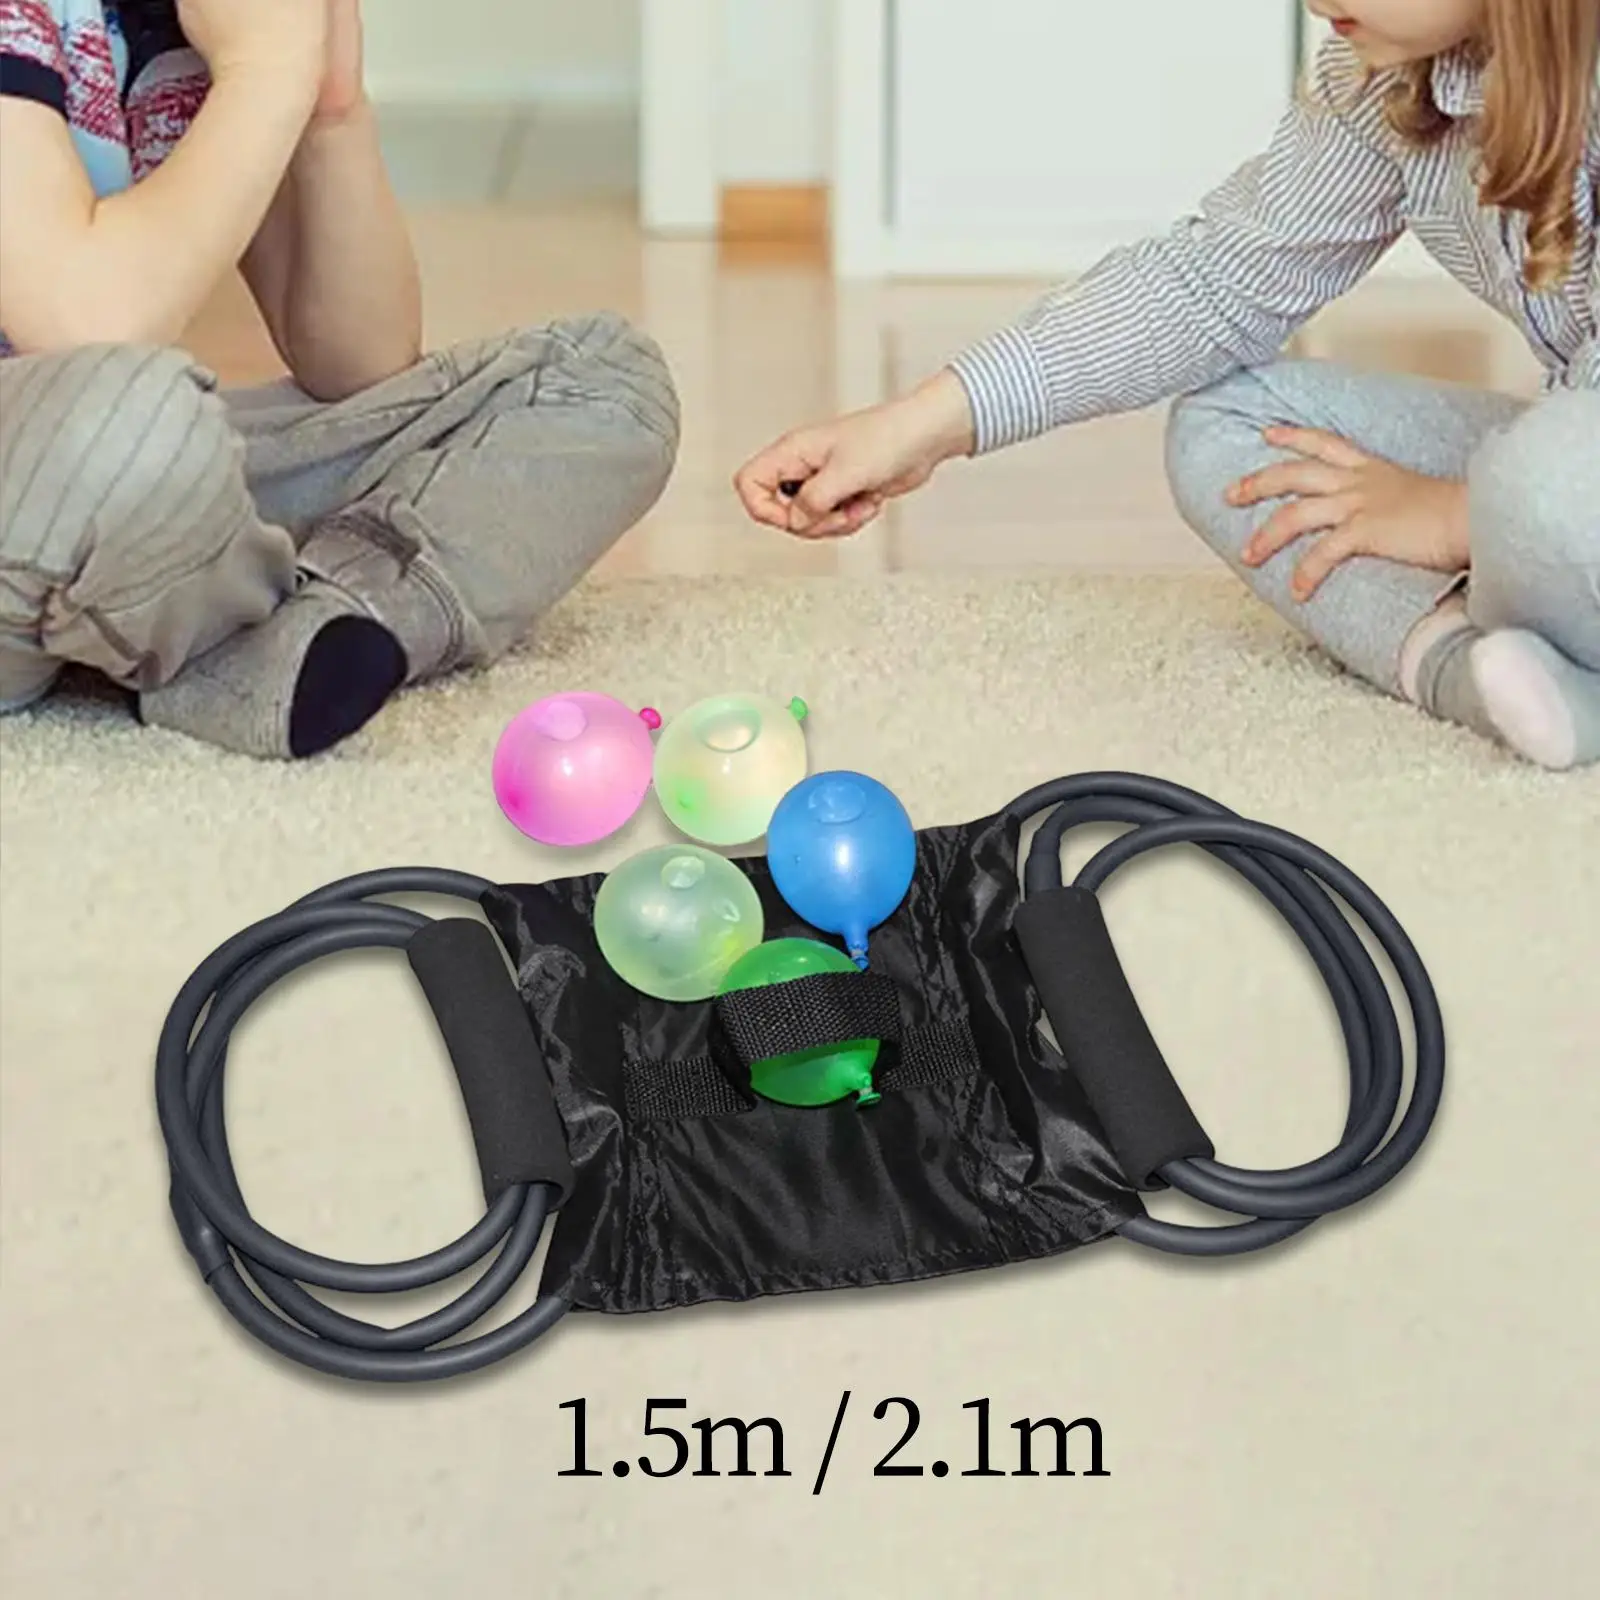 Water Balloon Launcher Balloon Catapult Snowball Launcher Water Toy 3 Men Slingshots for Family Kids Reunions Swimming Pool